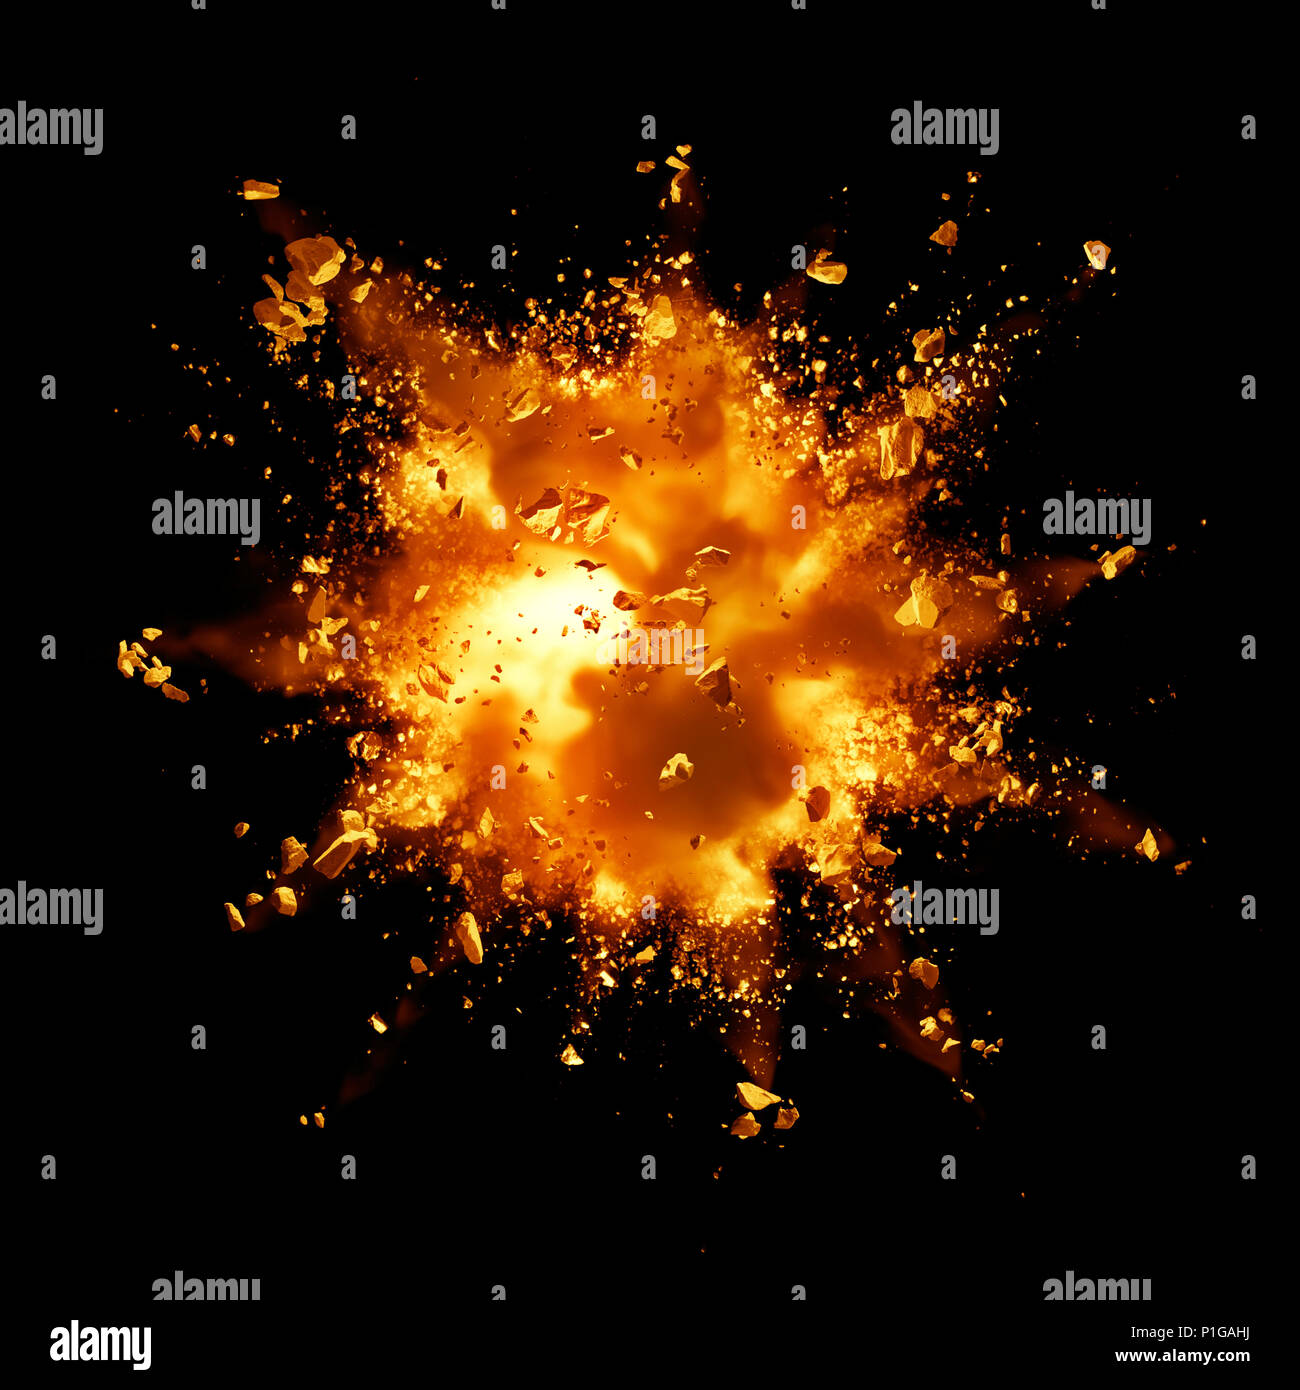 fire explosion with debris against black background Stock Photo